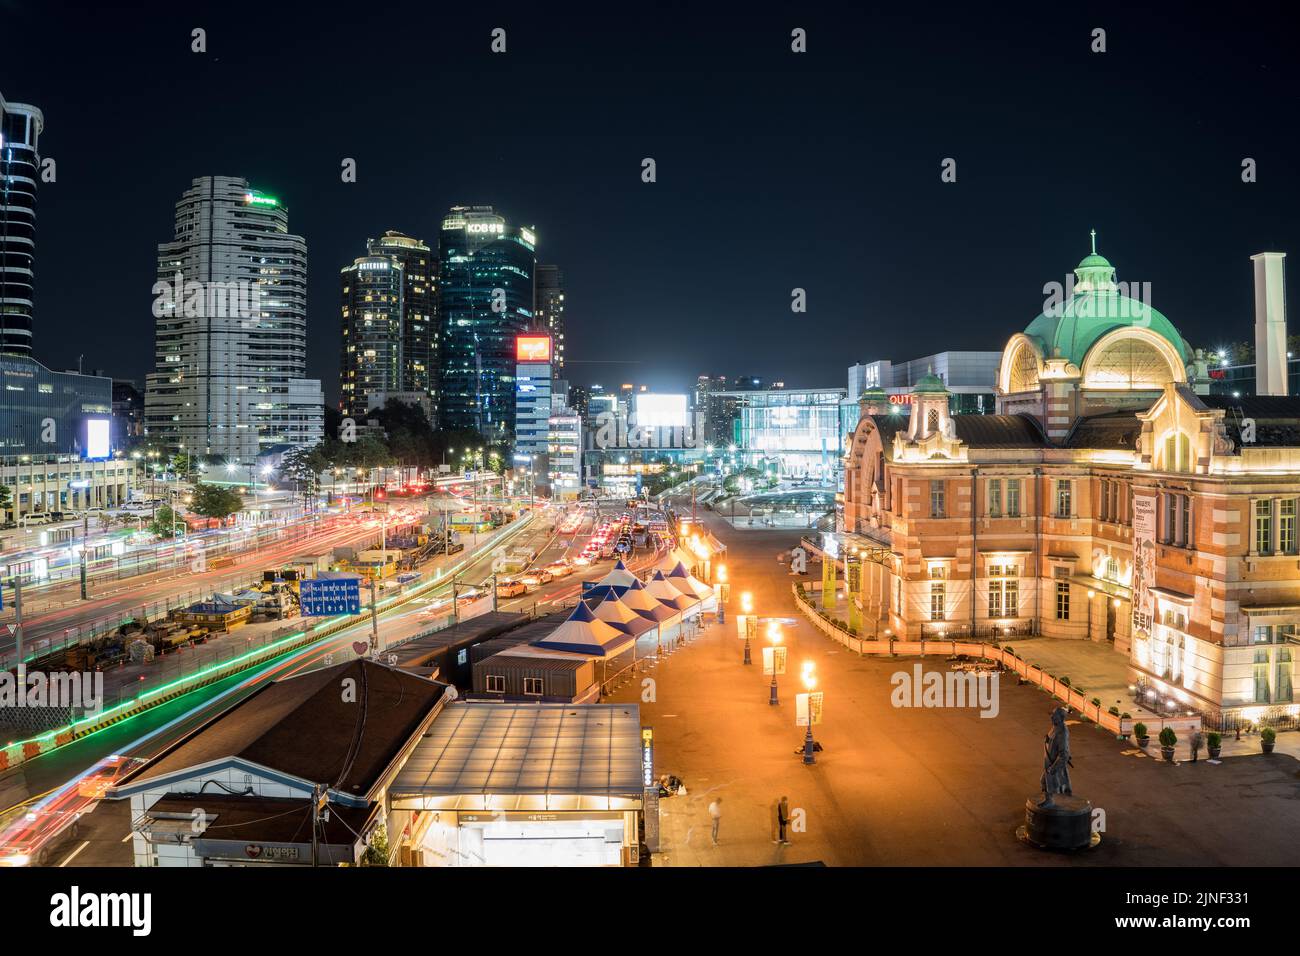 Seoul station brightly lit city scape at night Stock Photo